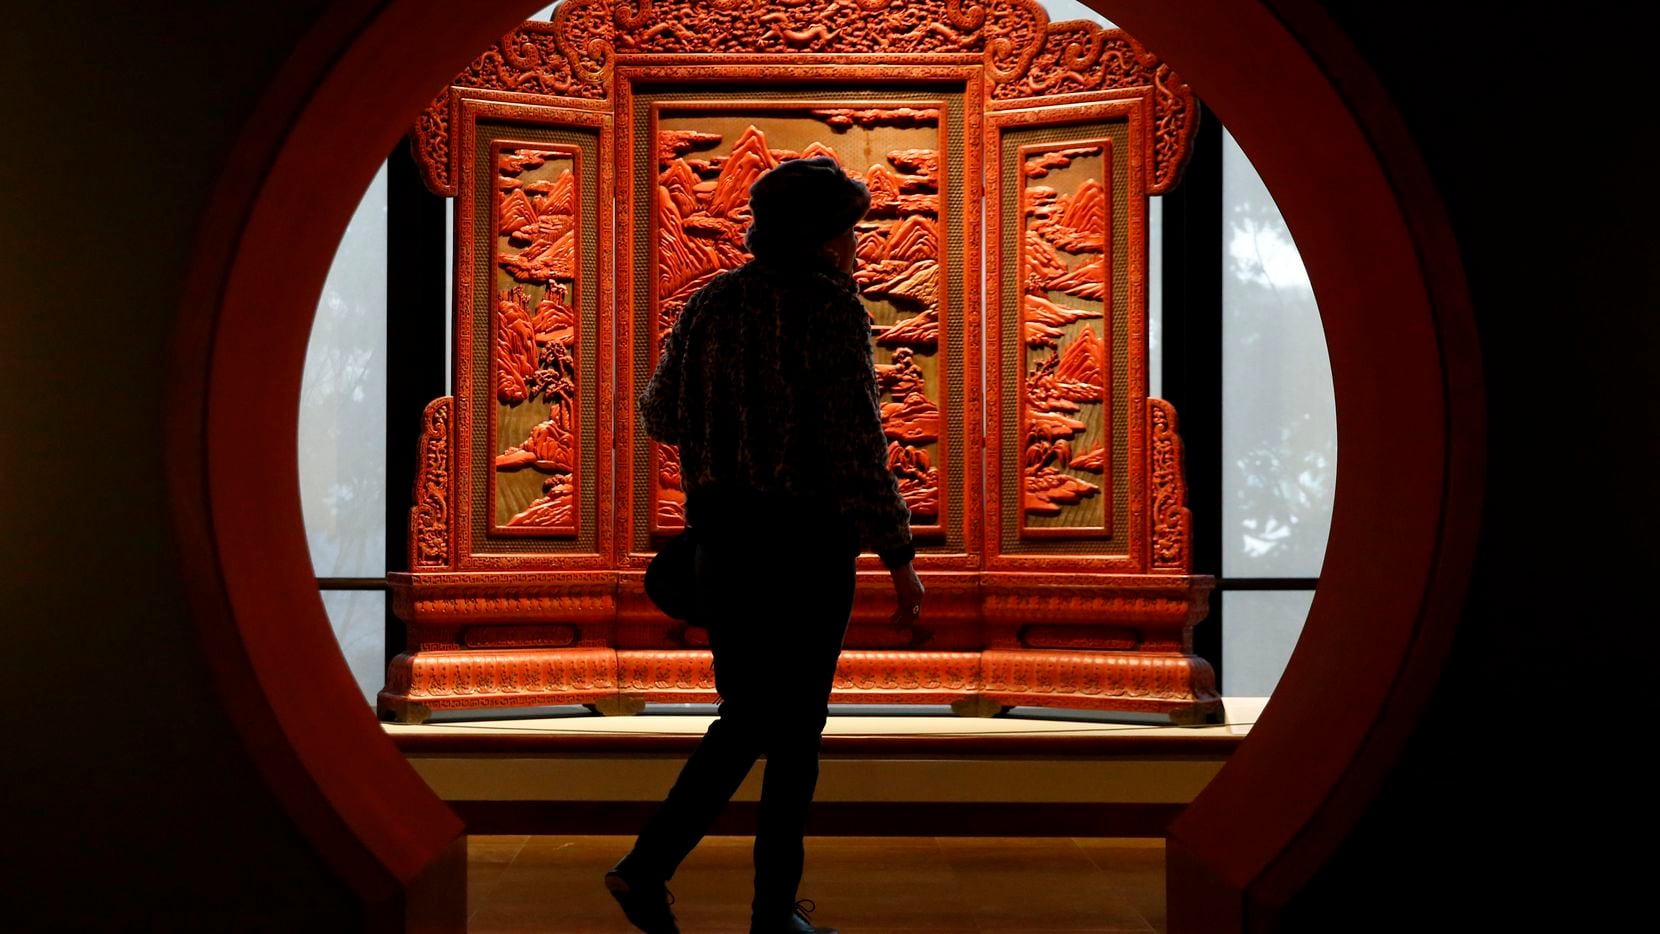 Florence Barnett walks past a lacquered screen at the Crow Museum of Asian Art in Dallas on...